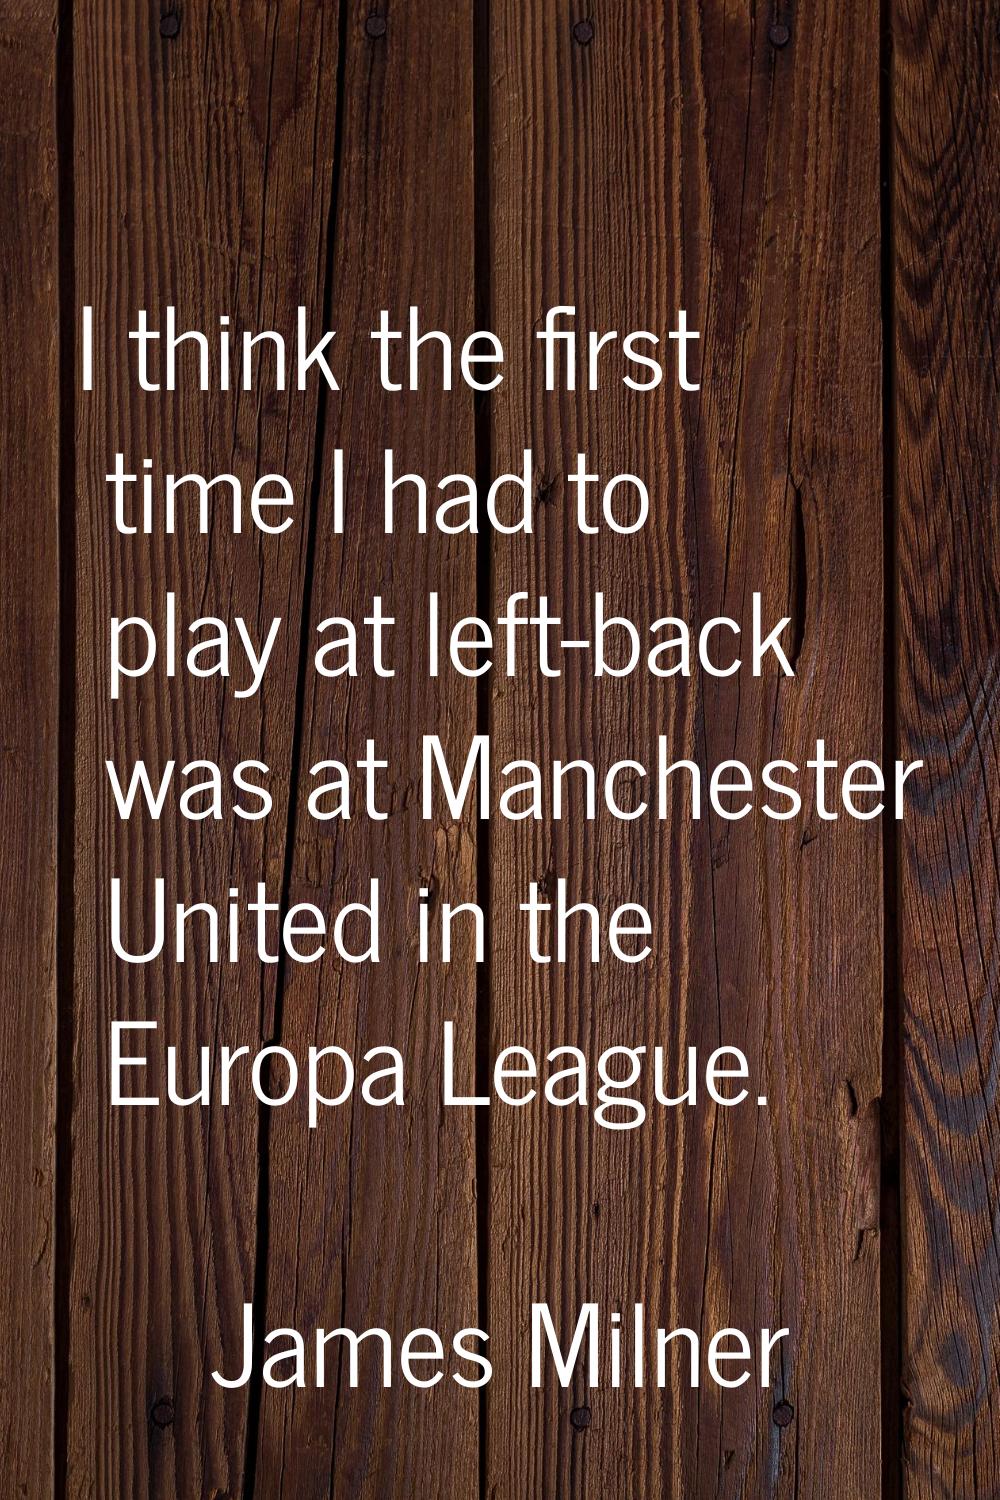 I think the first time I had to play at left-back was at Manchester United in the Europa League.